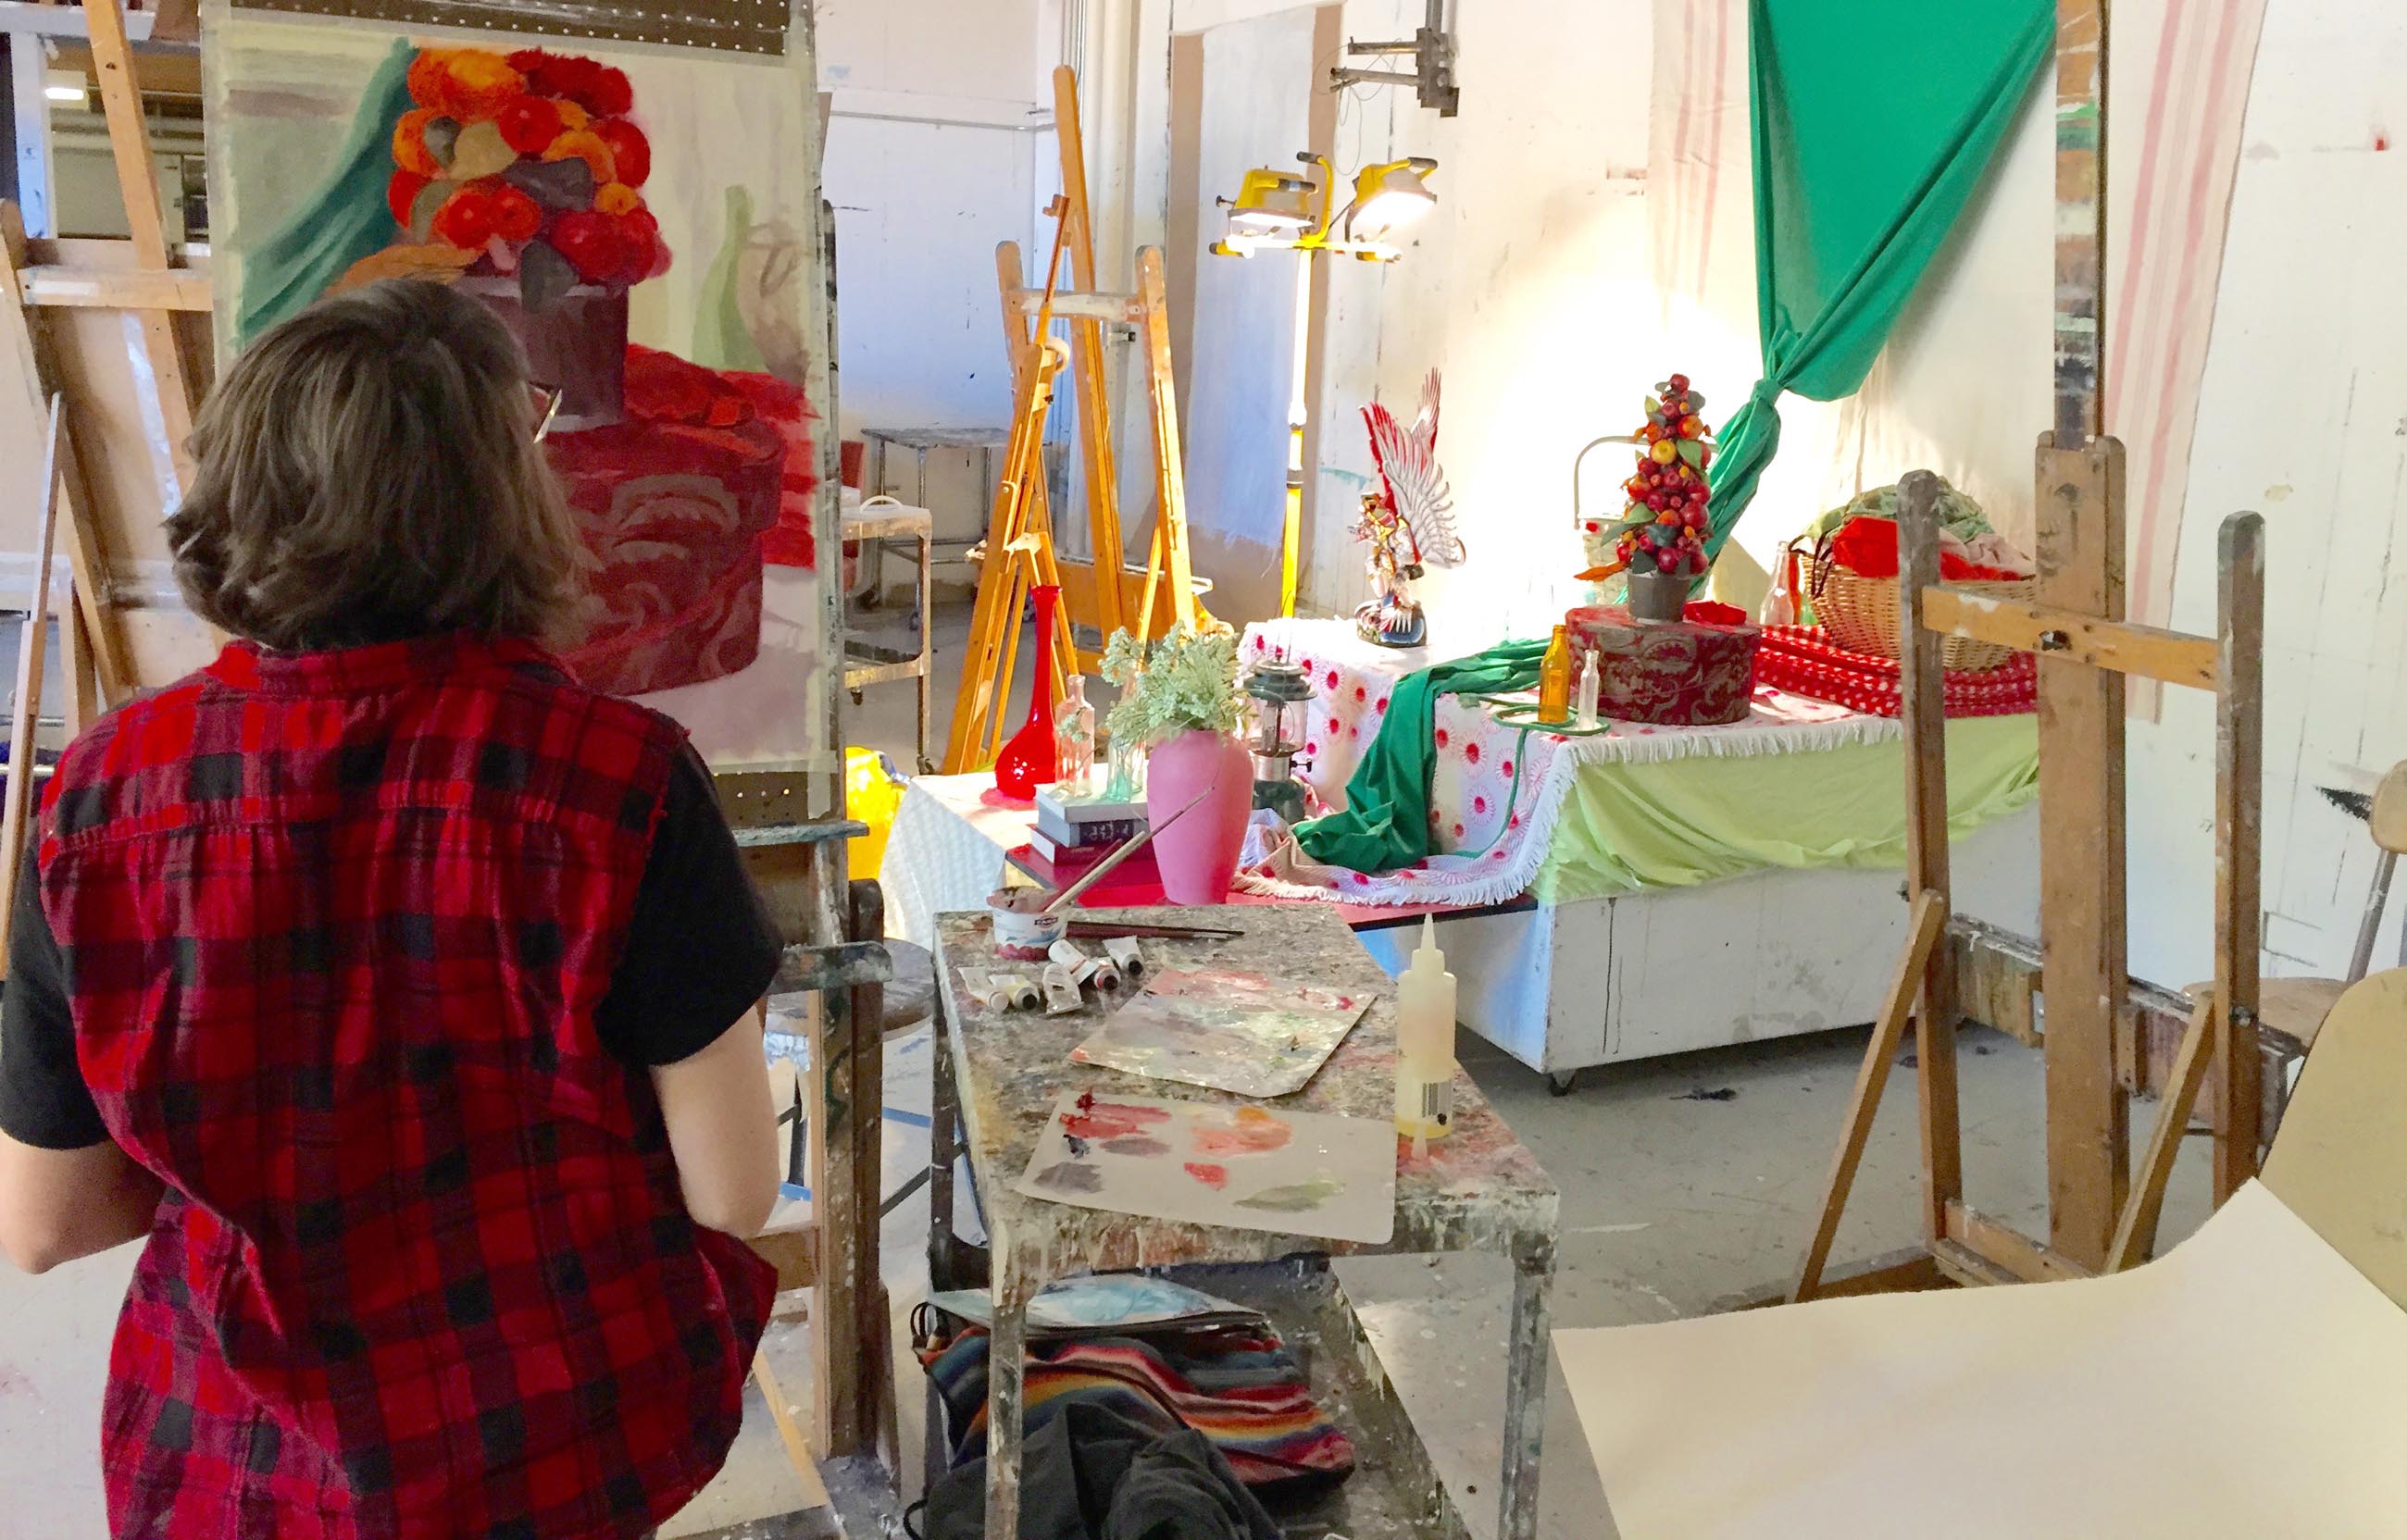 Student at an easel painting a colorful still life in a bright studio